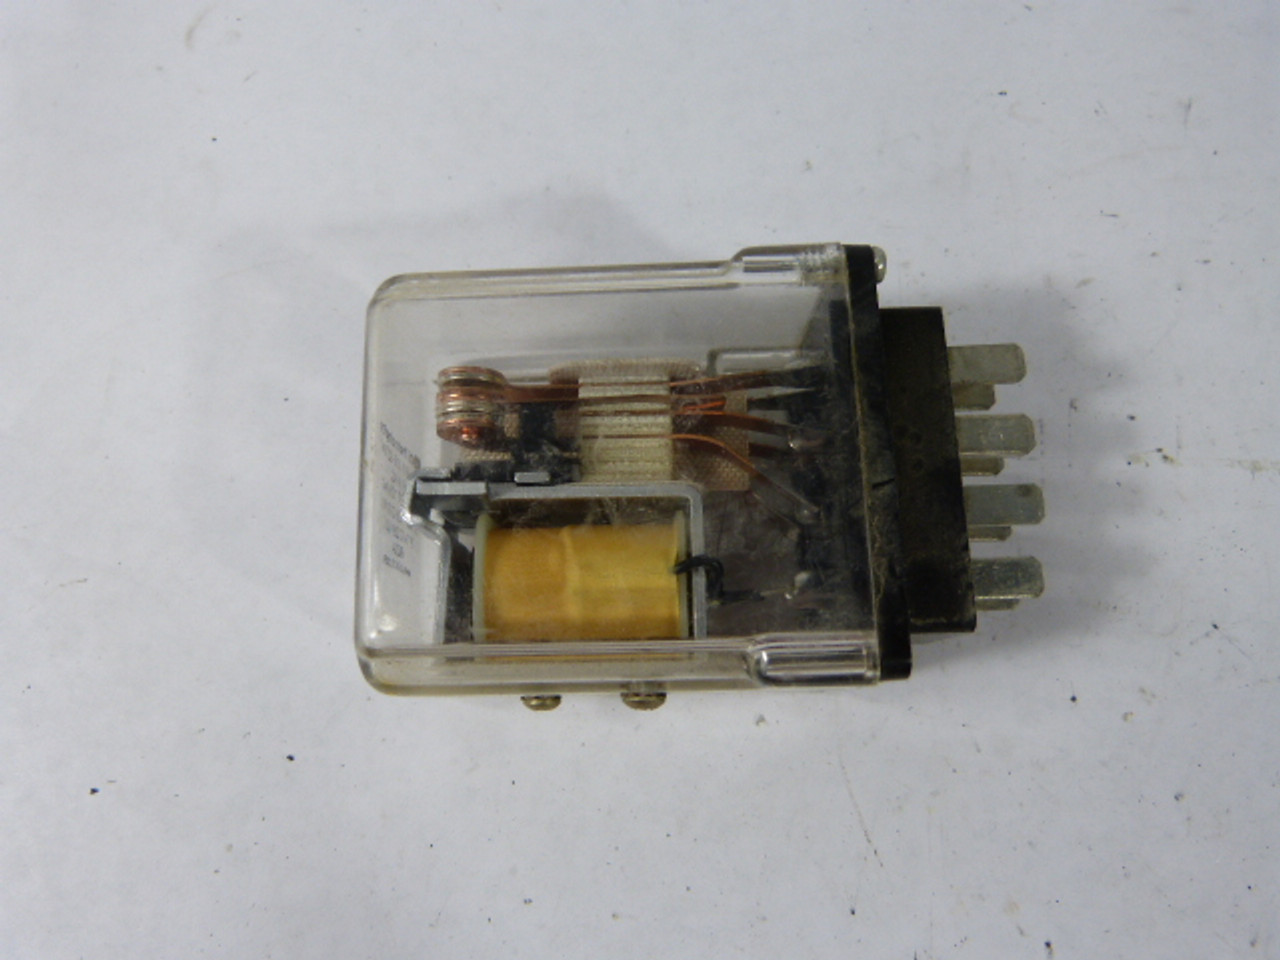 CII Technologies 136-62T3A1 Relay 120 V 30 Amps USED